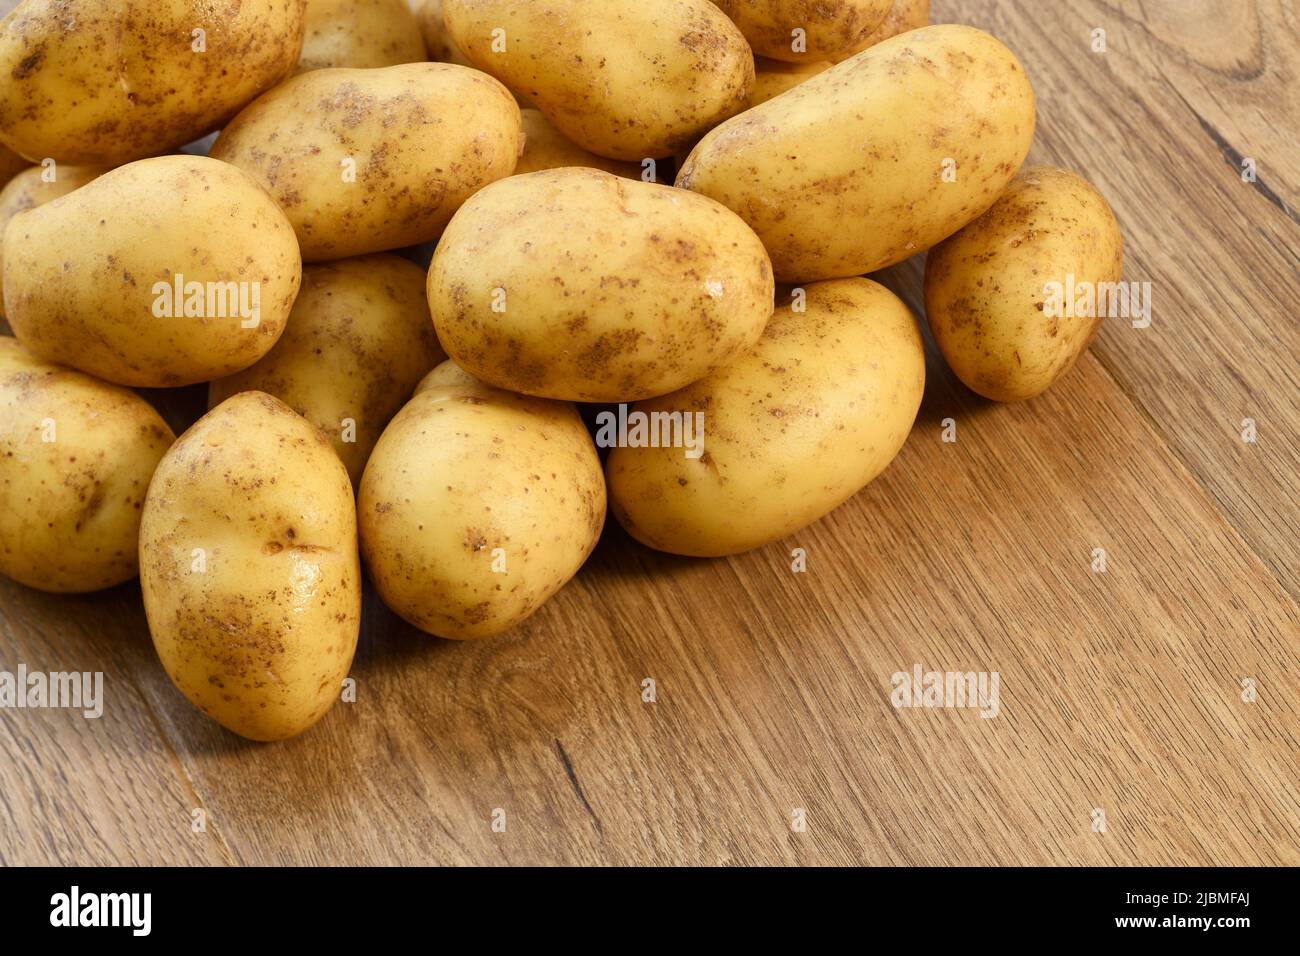 A pile of potatoes on a wooden board Stock Photo